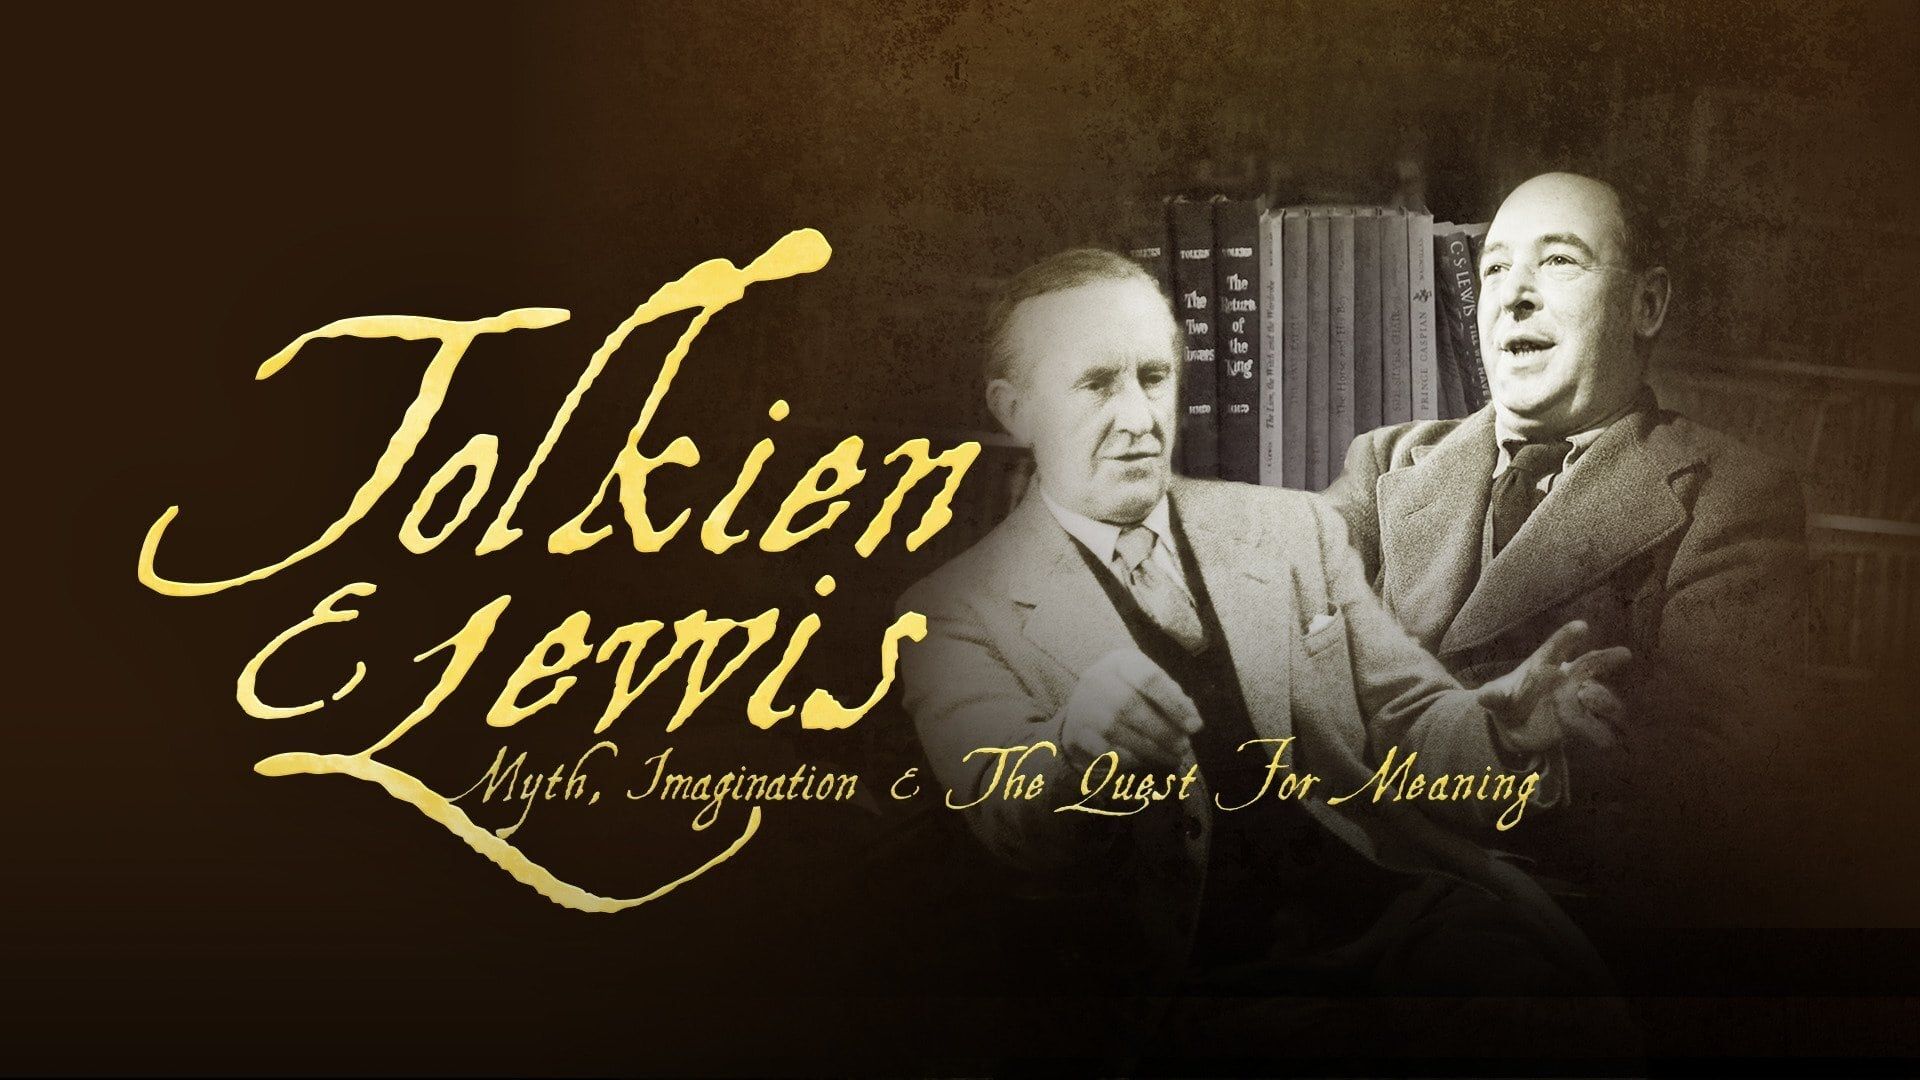 Tolkien & Lewis: Myth, Imagination & The Quest for Meaning background